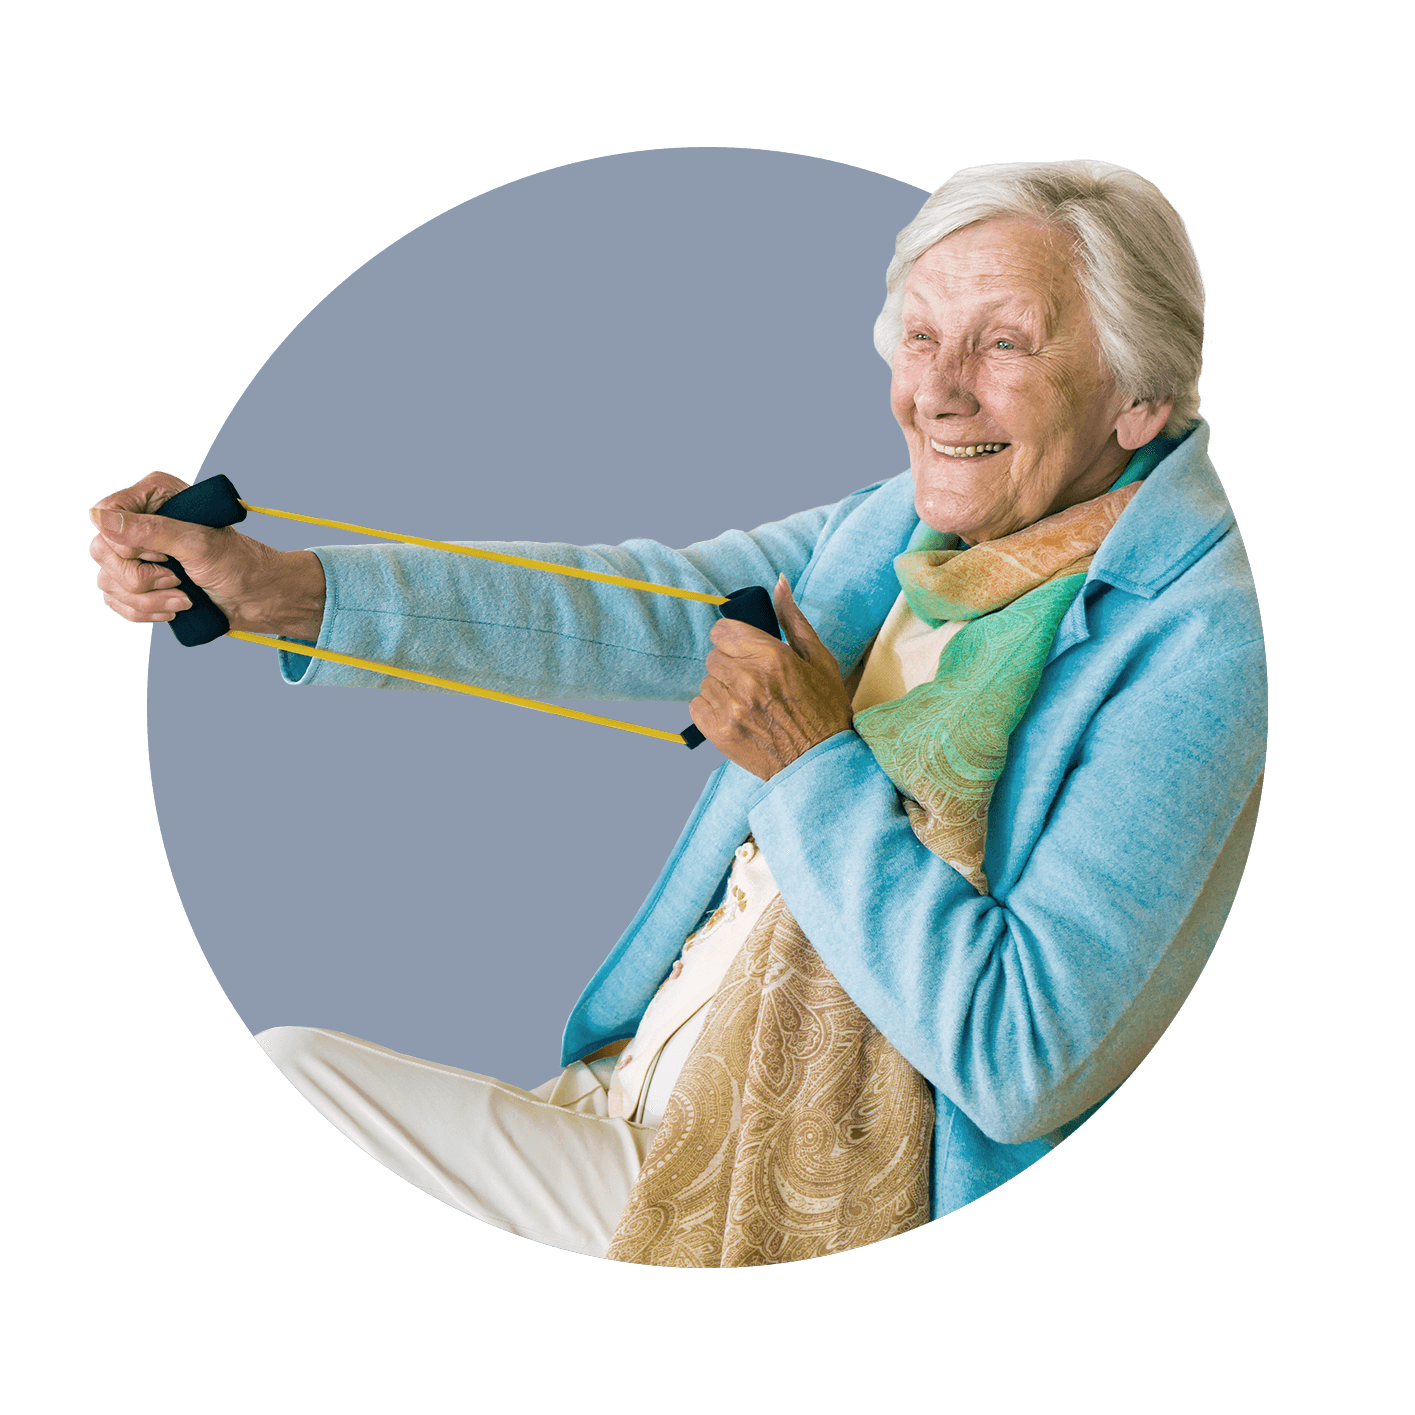 Elderly woman in aged care home sitting down and exercising with resistant band